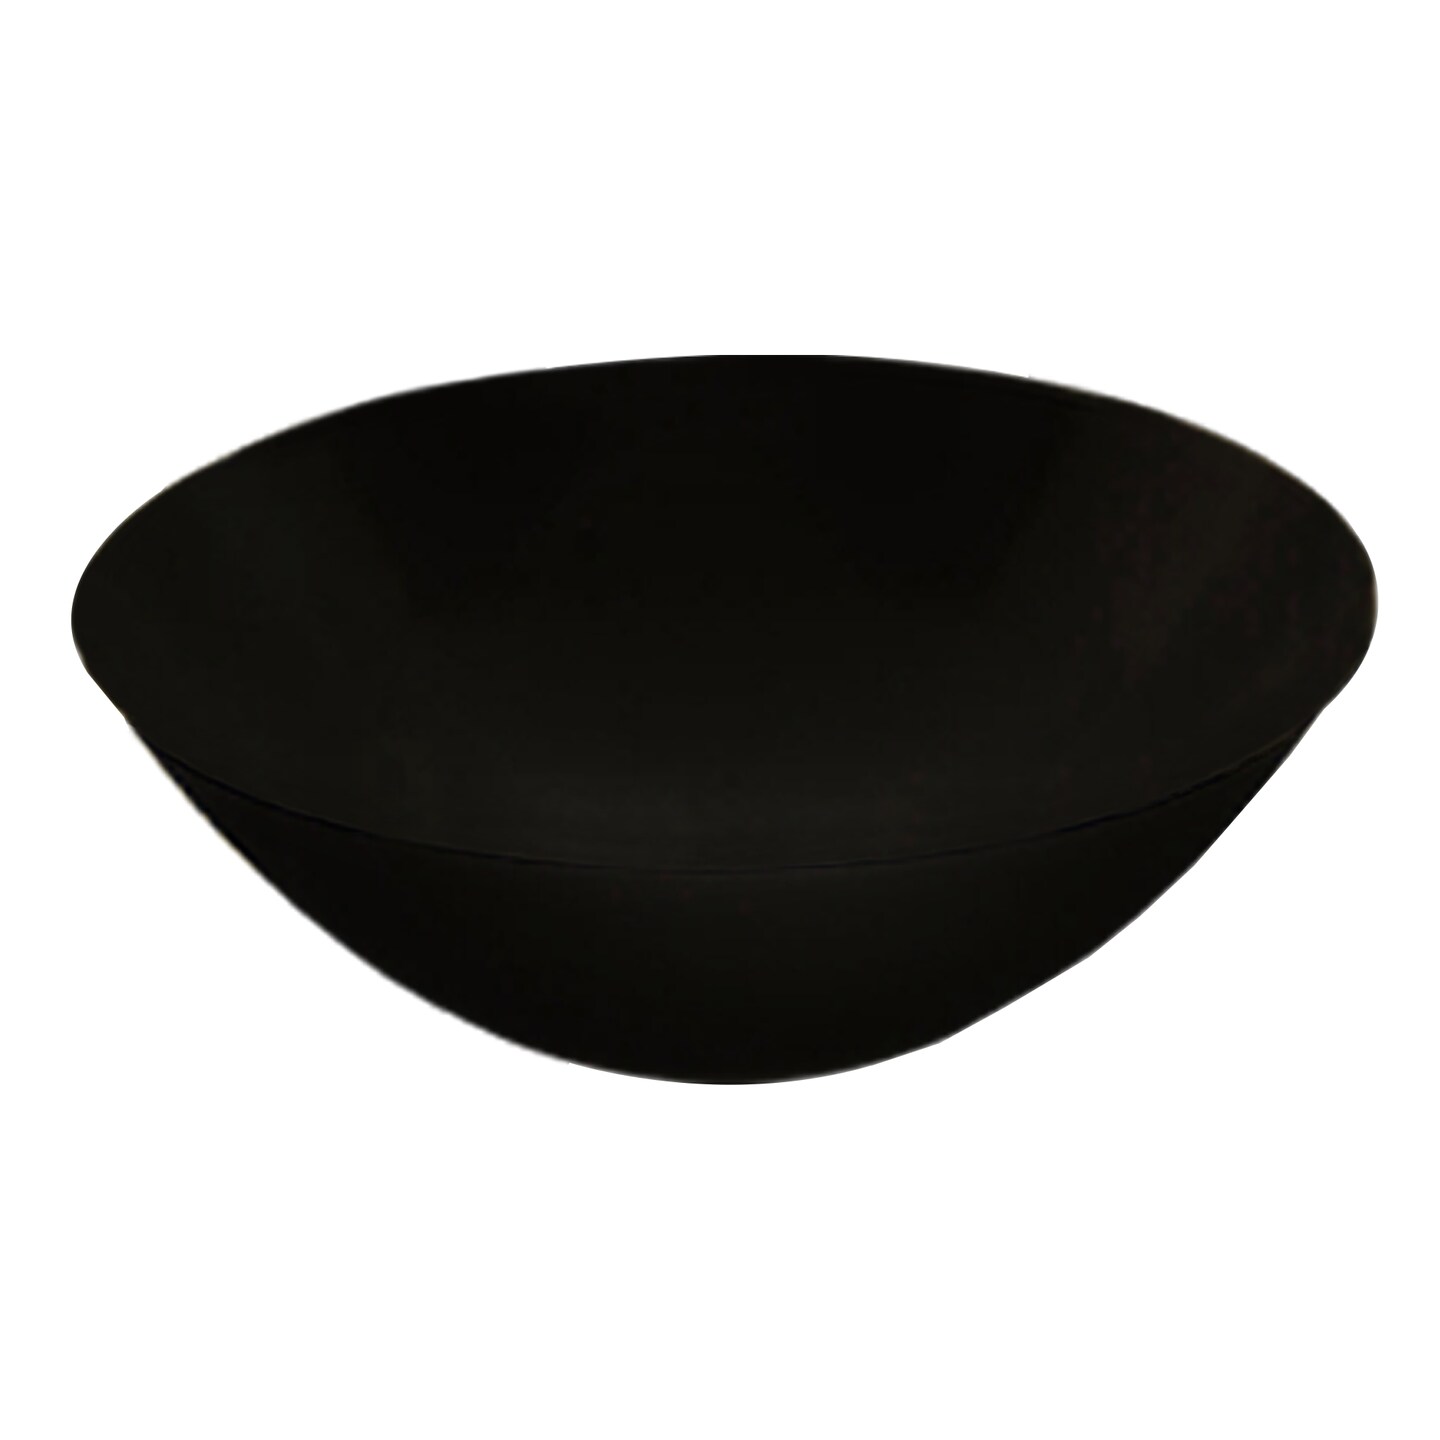 Solid Black Organic Round Disposable Plastic Bowls - 100 Ounce (24 Bowls)